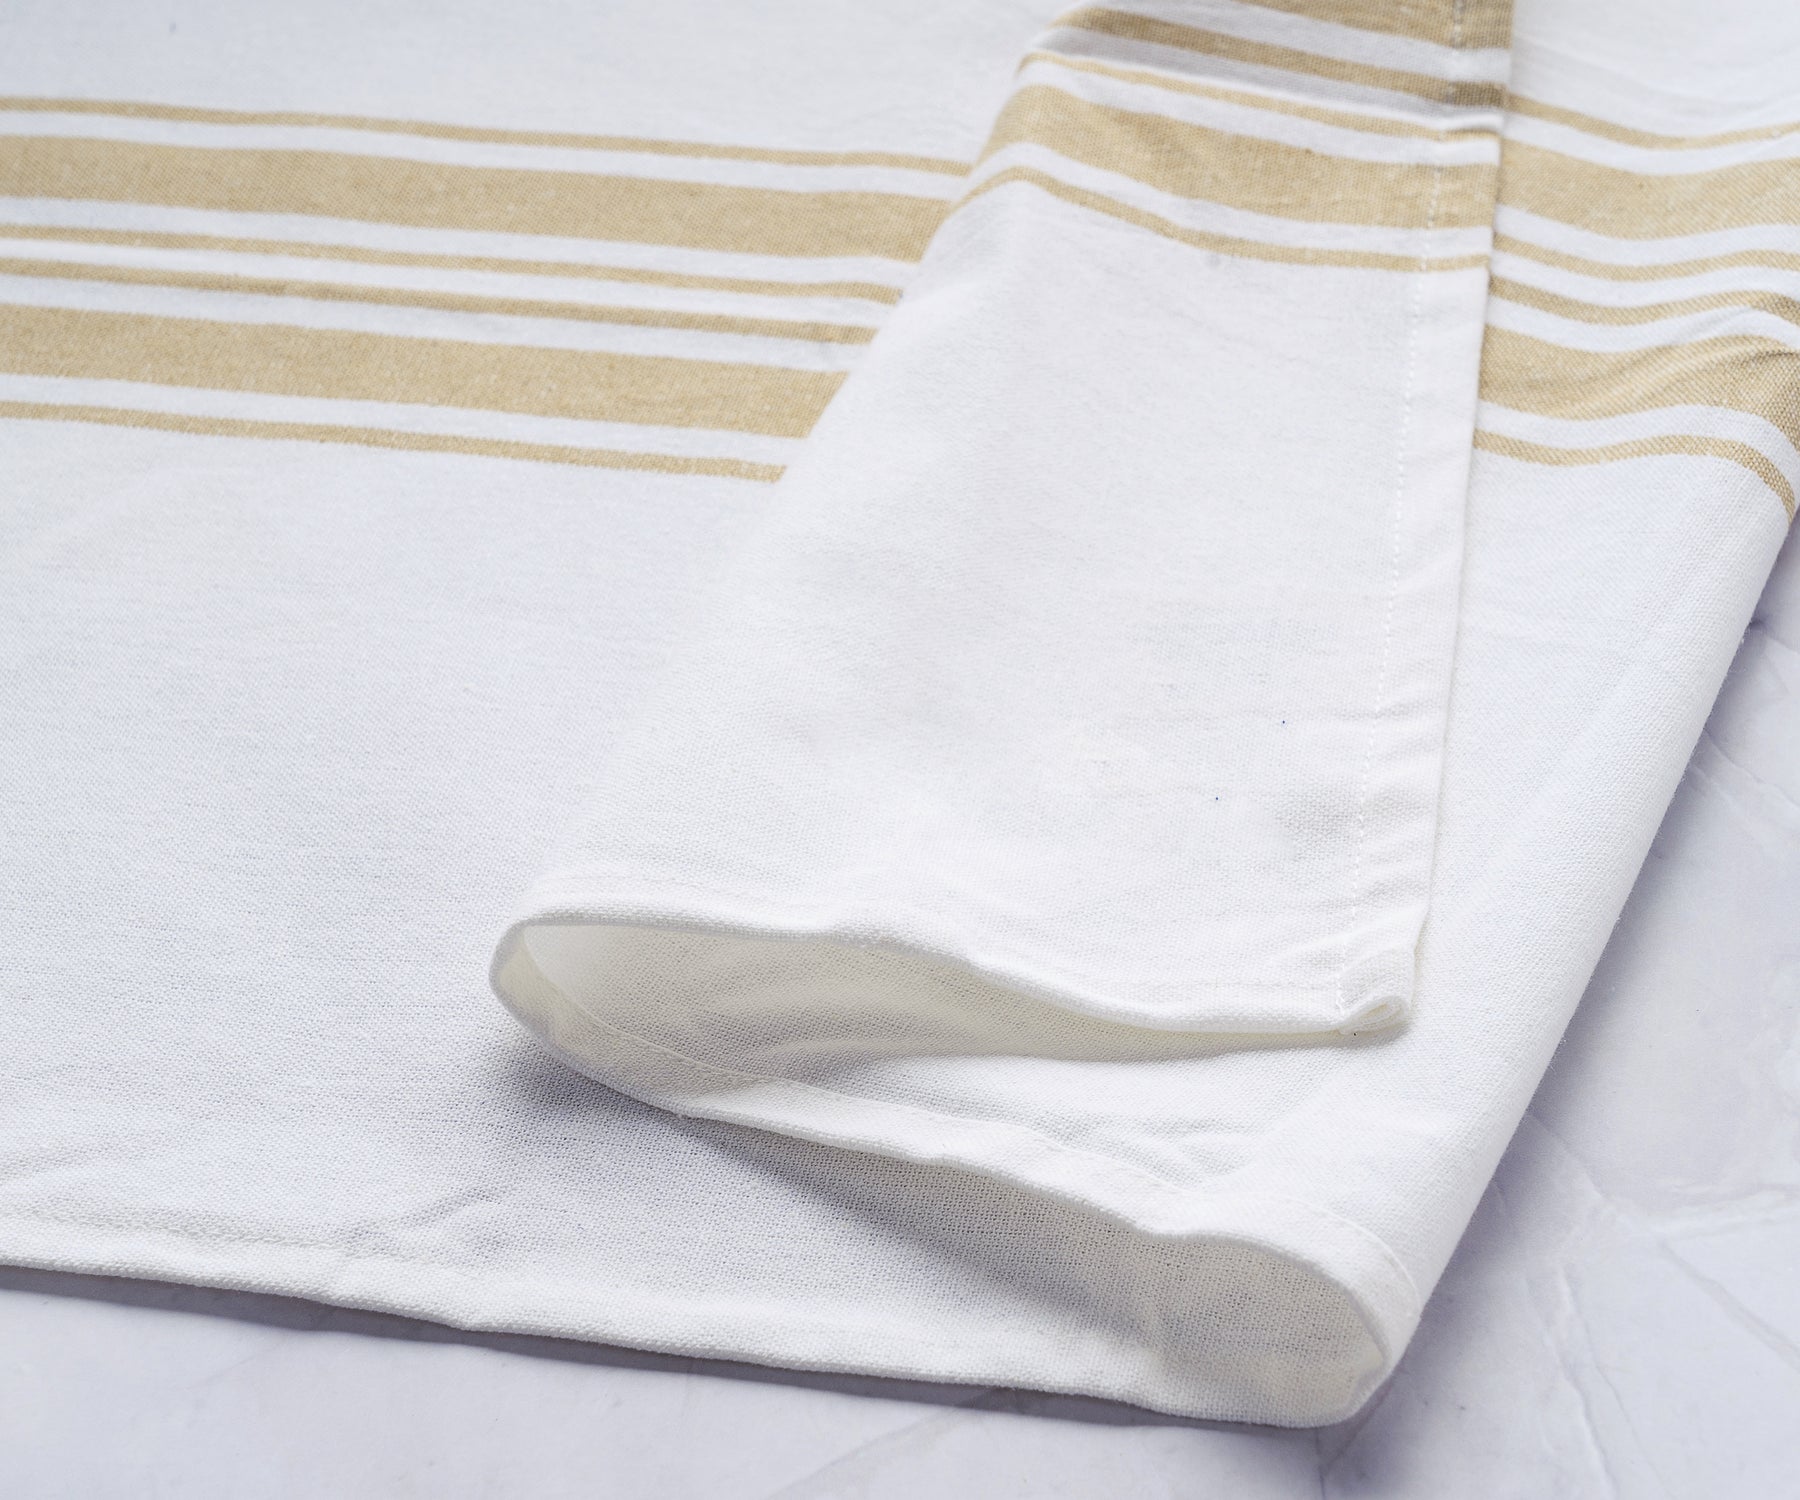 A single kitchen towel adorned with elegant gold stripes on a white fabric